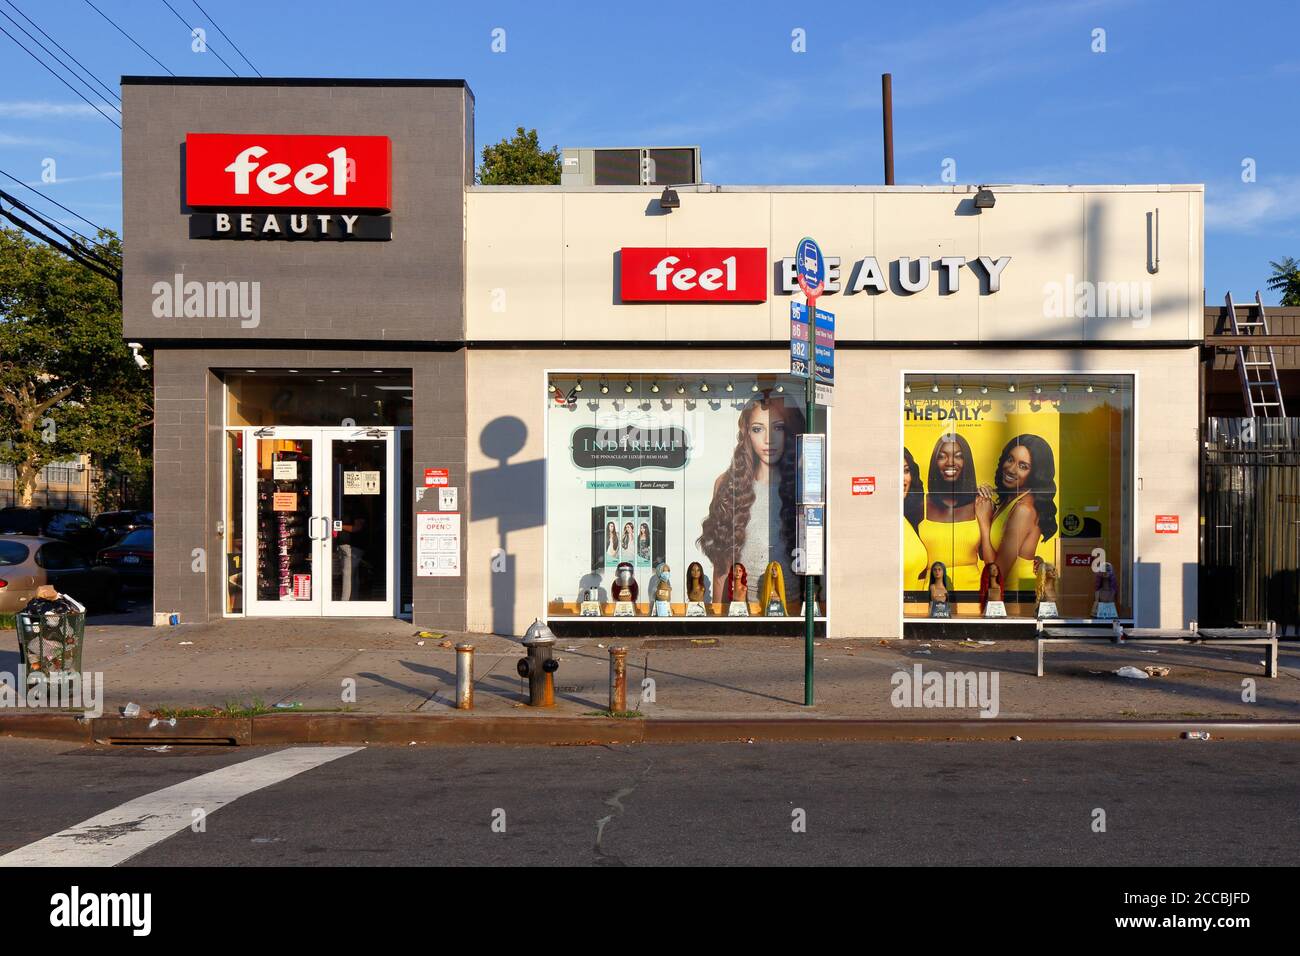 Feel Beauty Supply, 8020 Flatlands Ave, Brooklyn, NY. exterior storefront of a cosmetics and beauty supply chain store in the Carnarsie neighborhood. Stock Photo